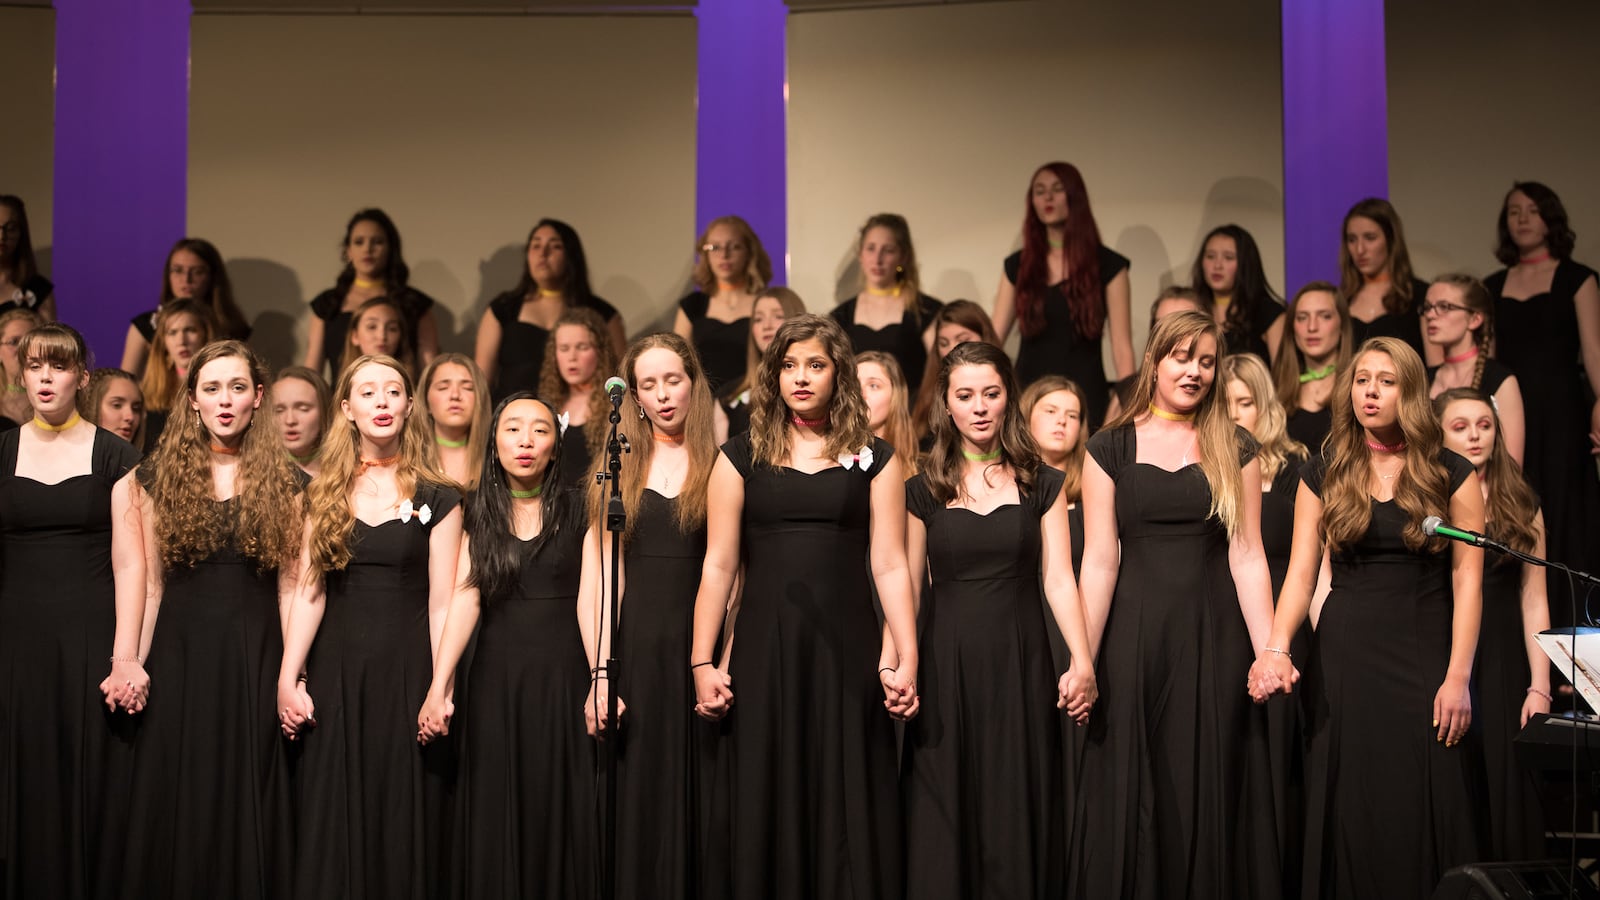 The choir at Arvada West High School in Colorado has commissioned and performed two songs about school shootings in an effort to help students process their fear.